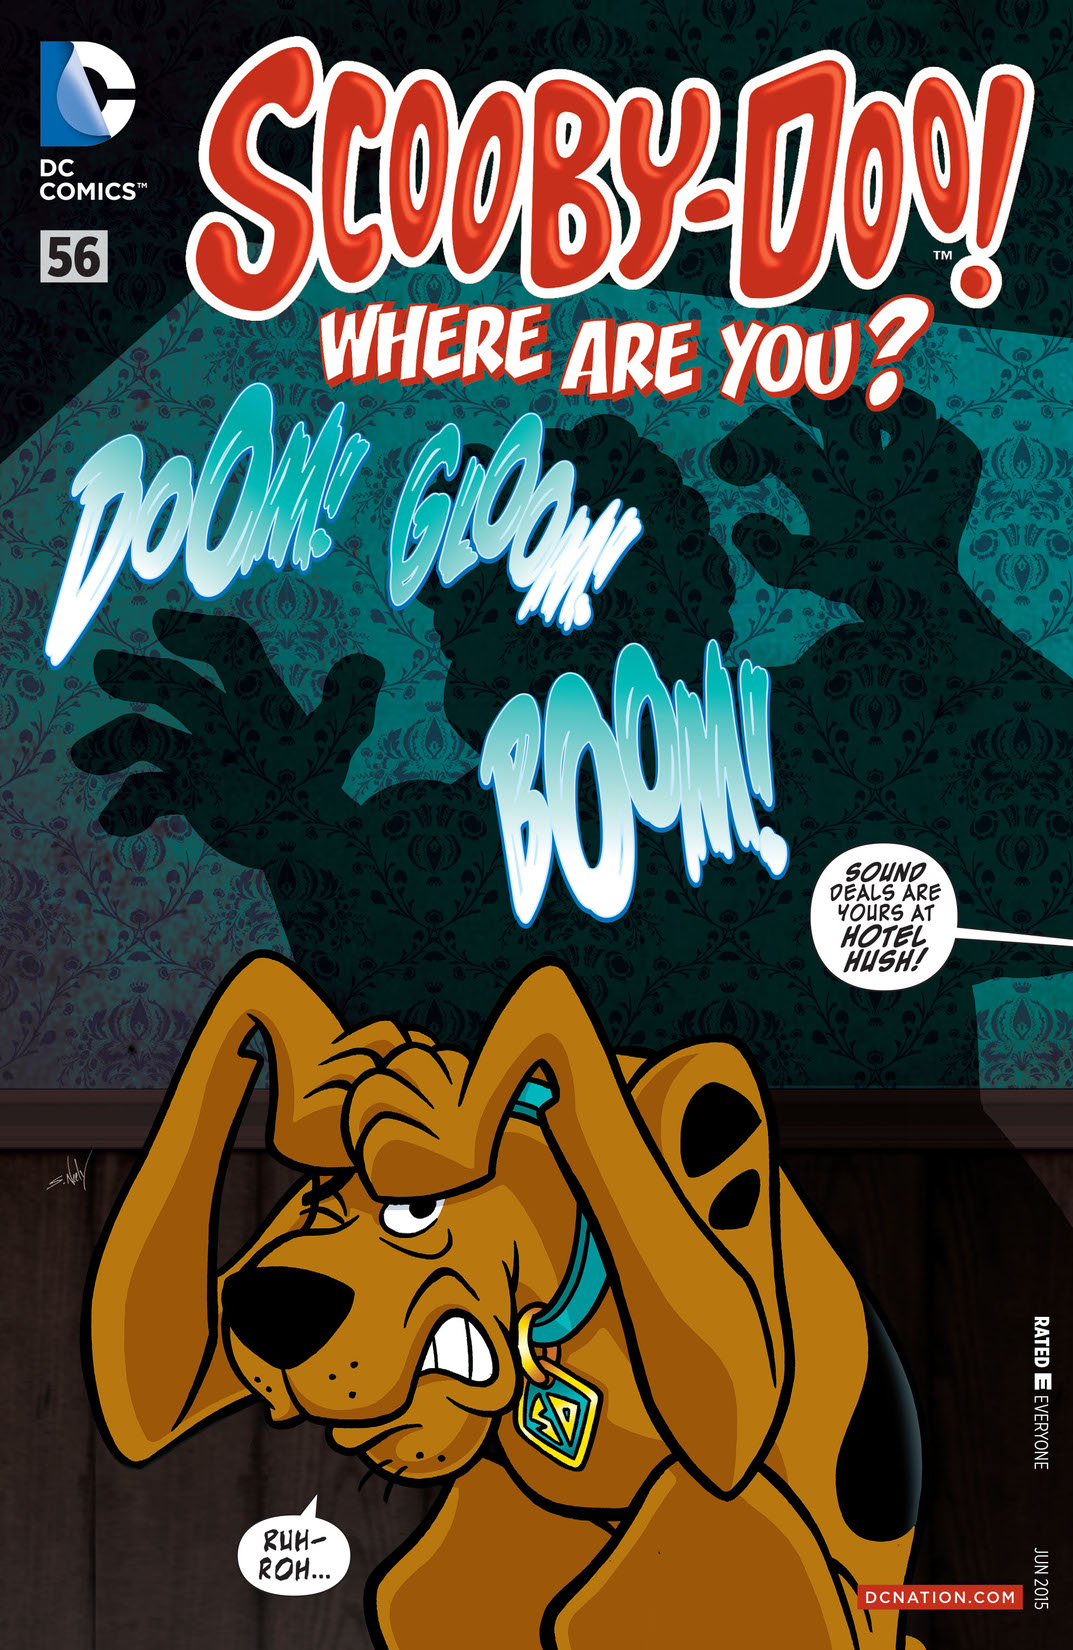 Scooby-Doo, Where Are You? #56 preview images